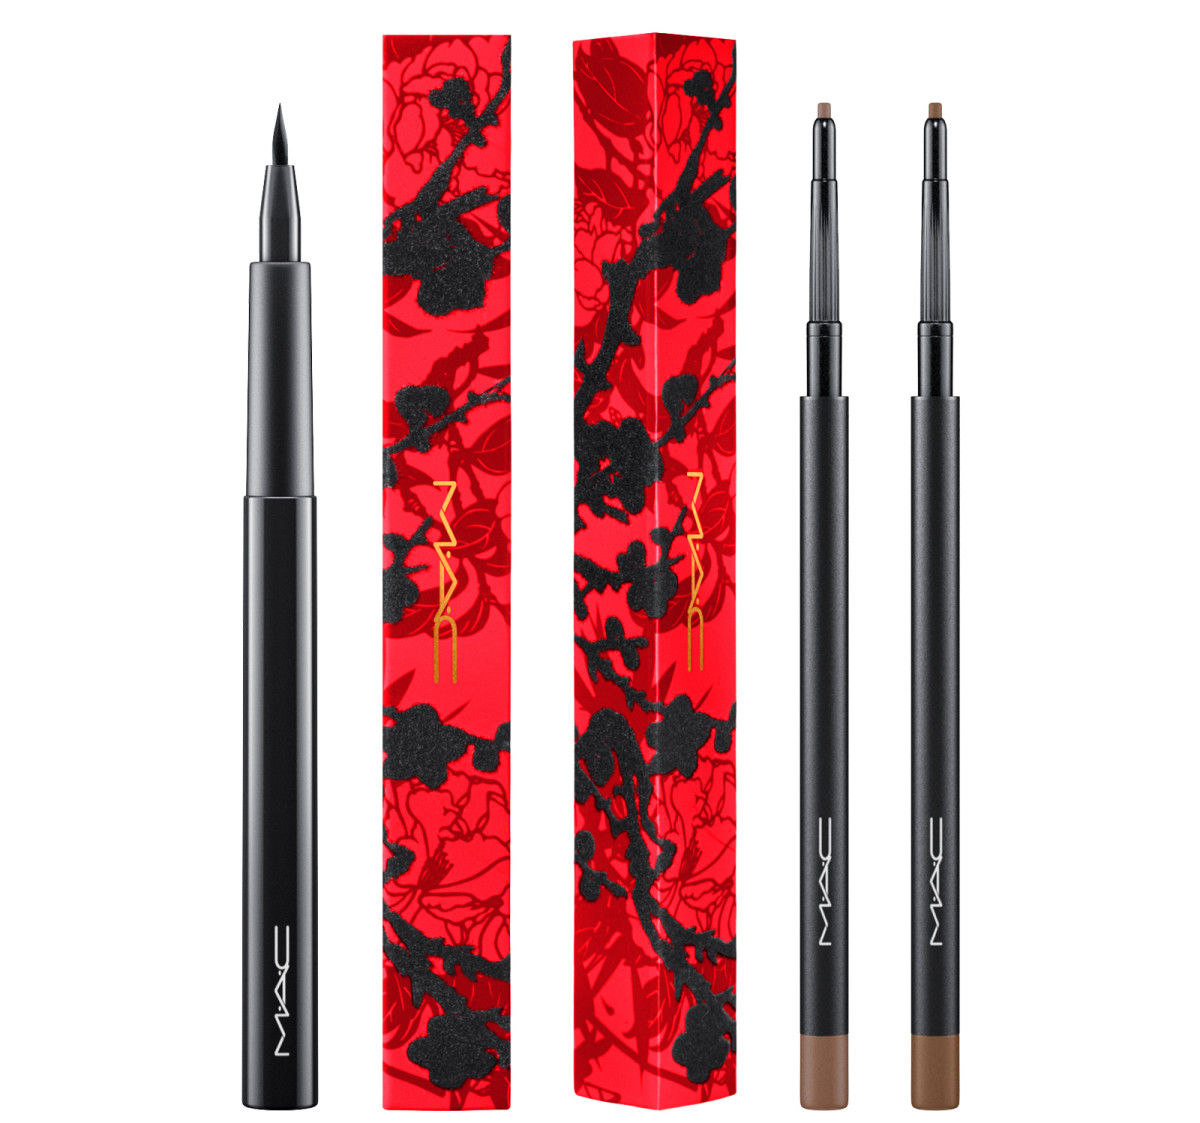 MAC Year of the Rooster eye liner and brow pencils